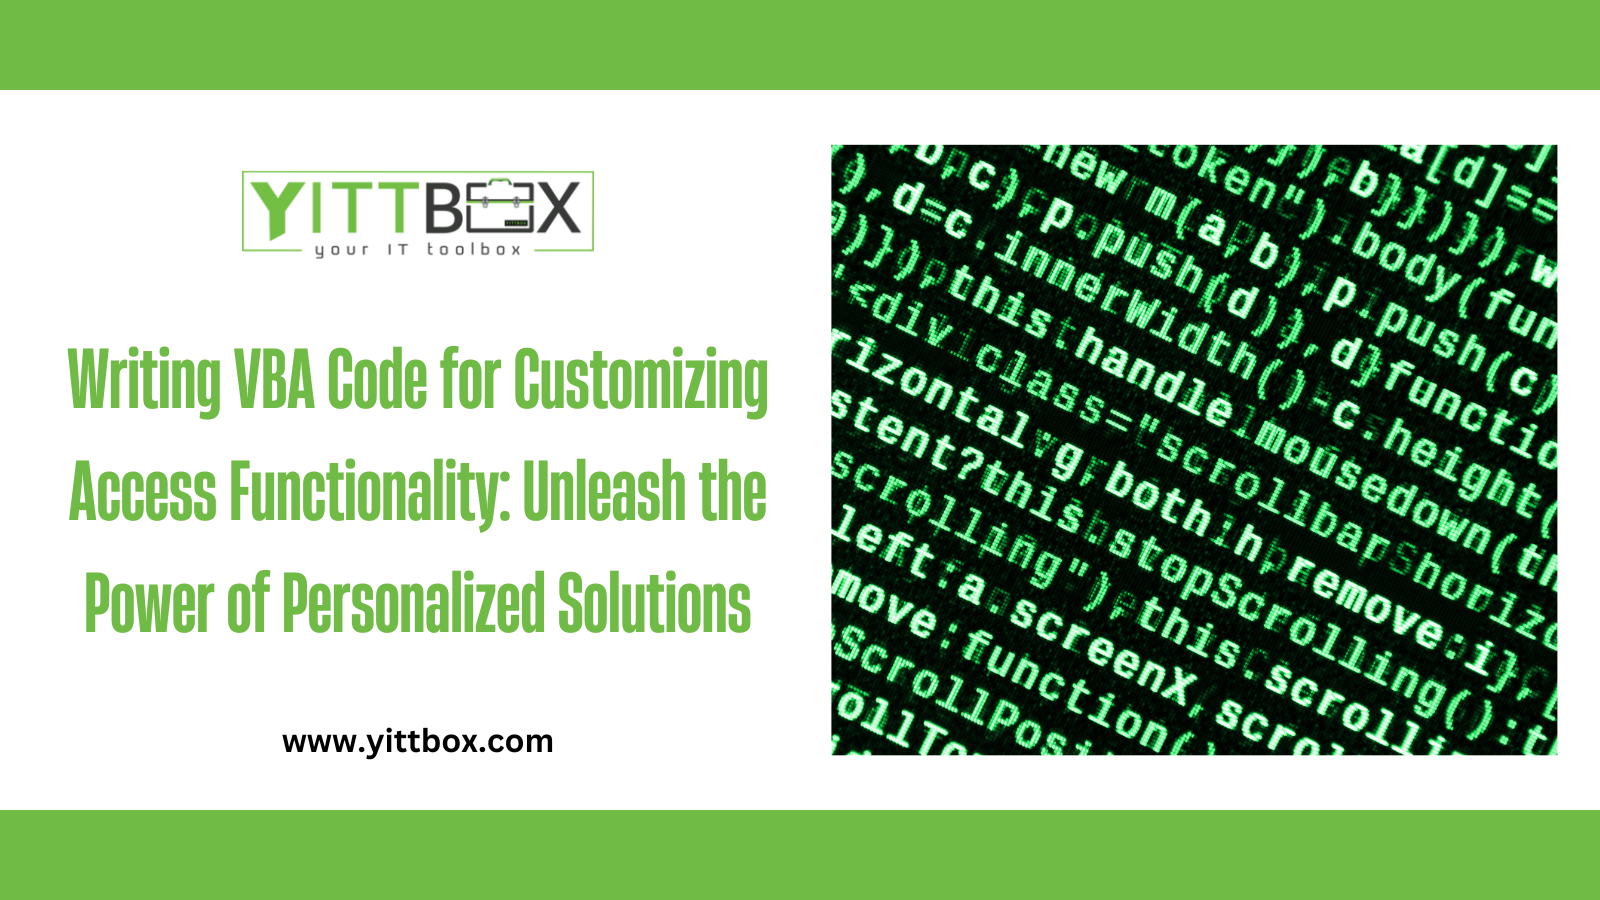 Writing VBA Code for Customizing Access Functionality: Unleash the Power of Personalized Solutions